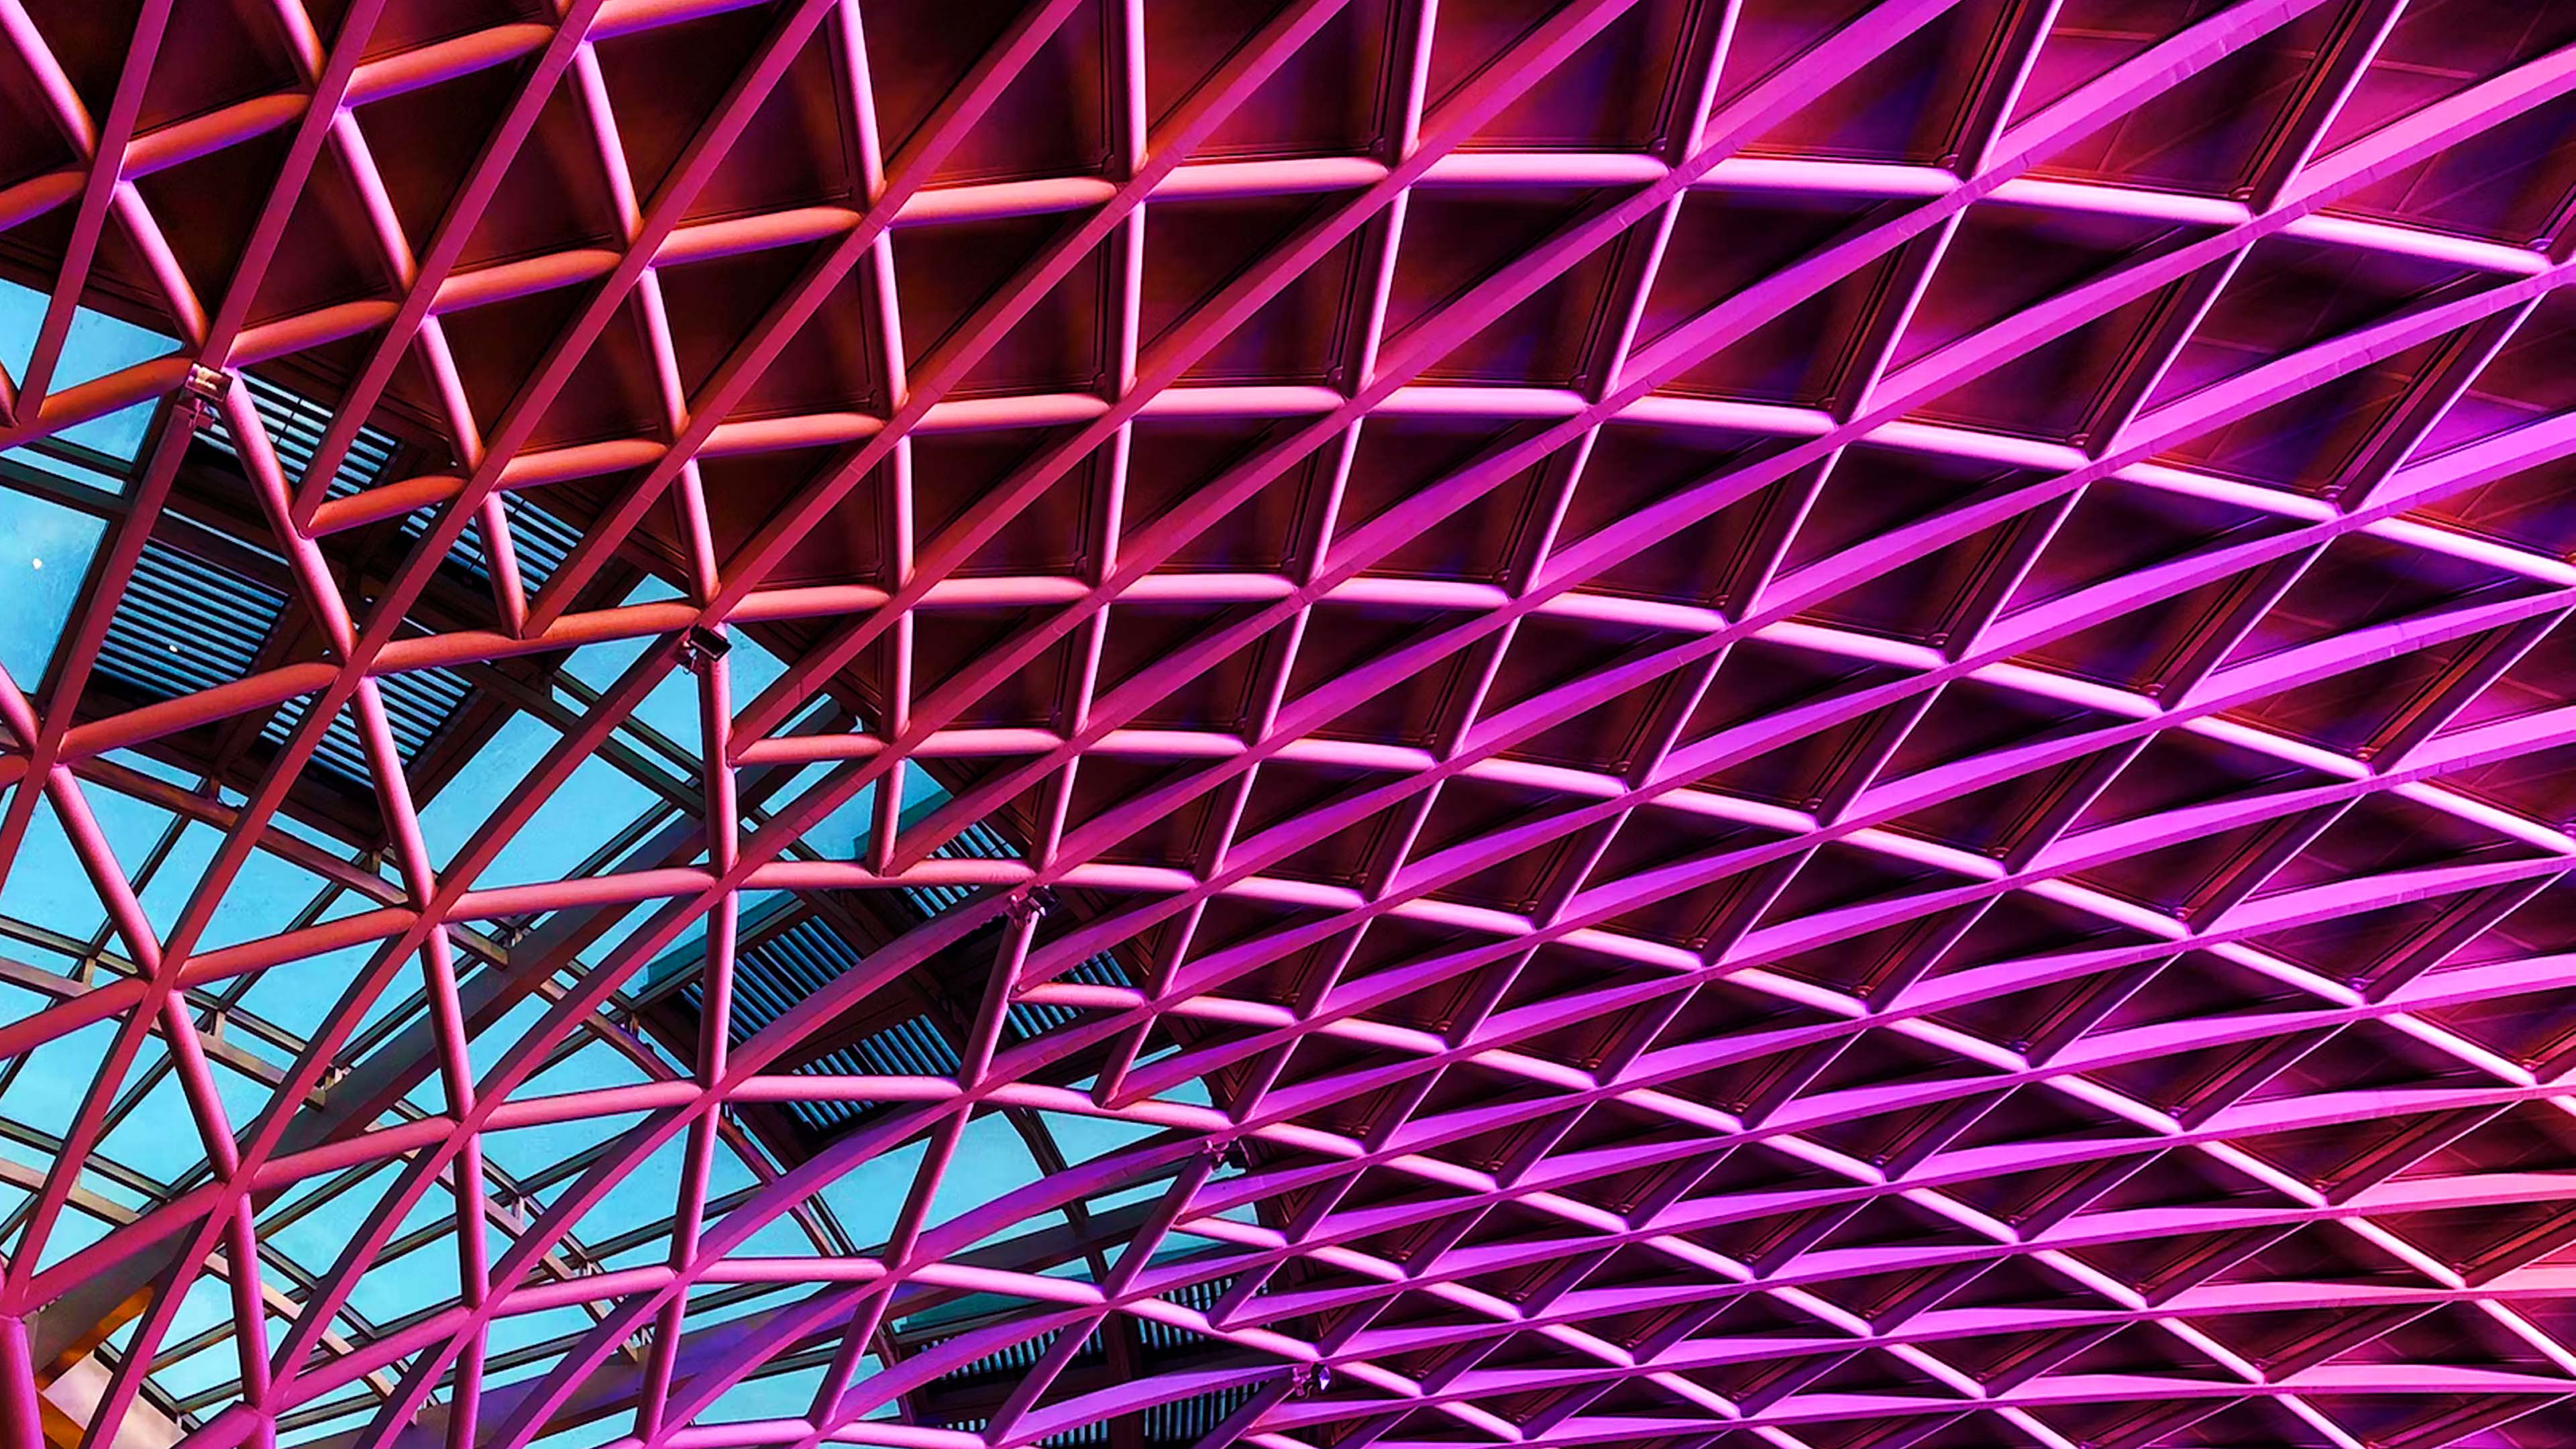 Ceiling of building lit up pink